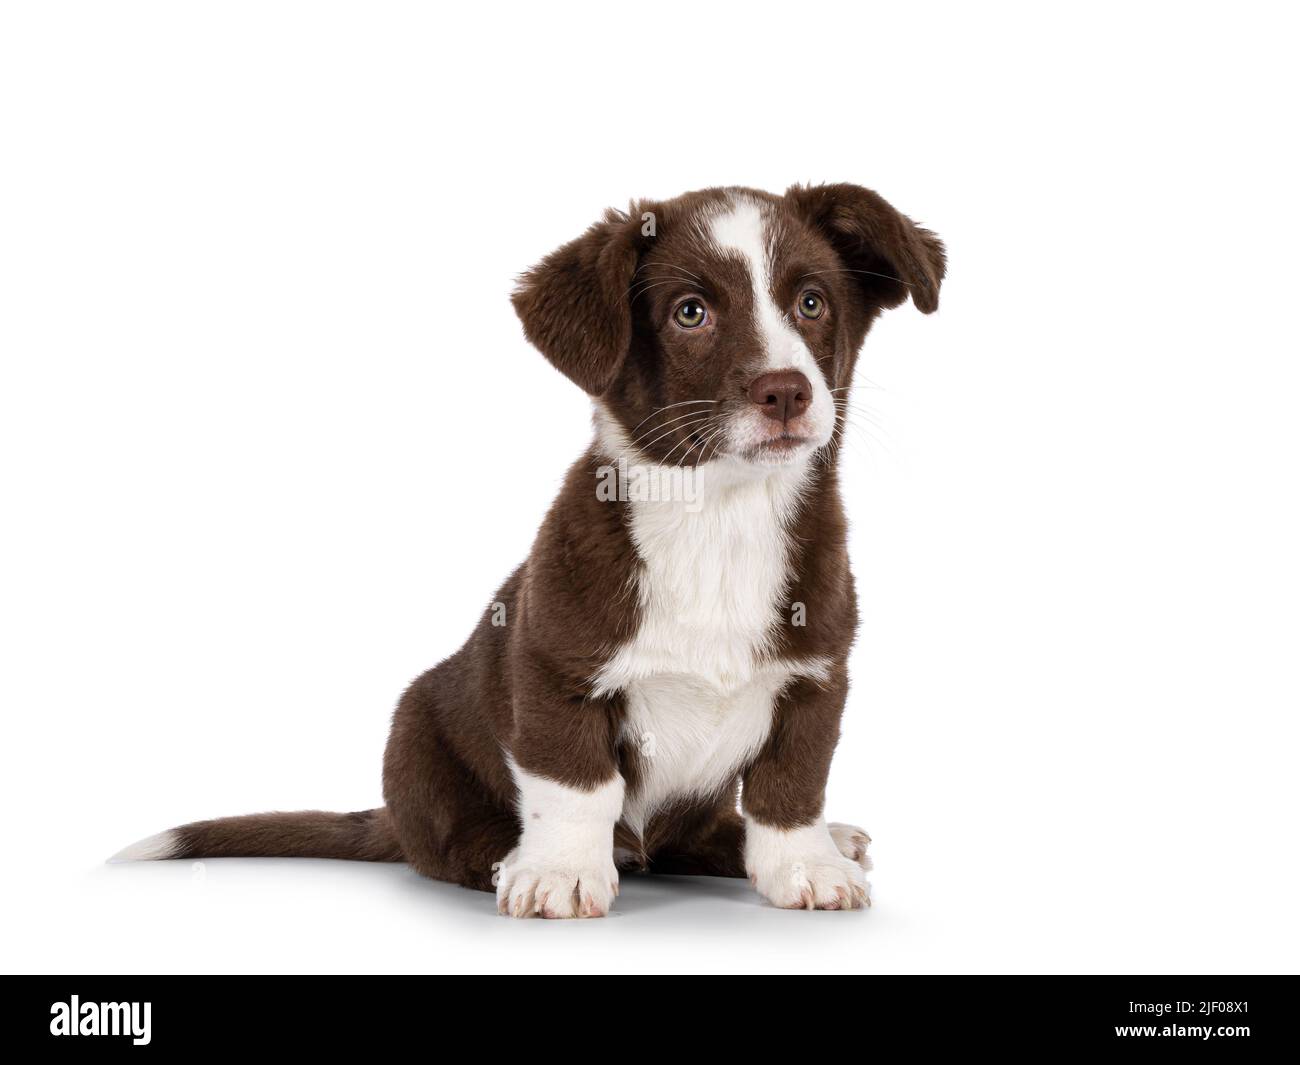 Cute brown with white Welsh Corgi Cardigan dog pup, sitting up facing front. Looking beside camera. Isolated on a white background. Stock Photo